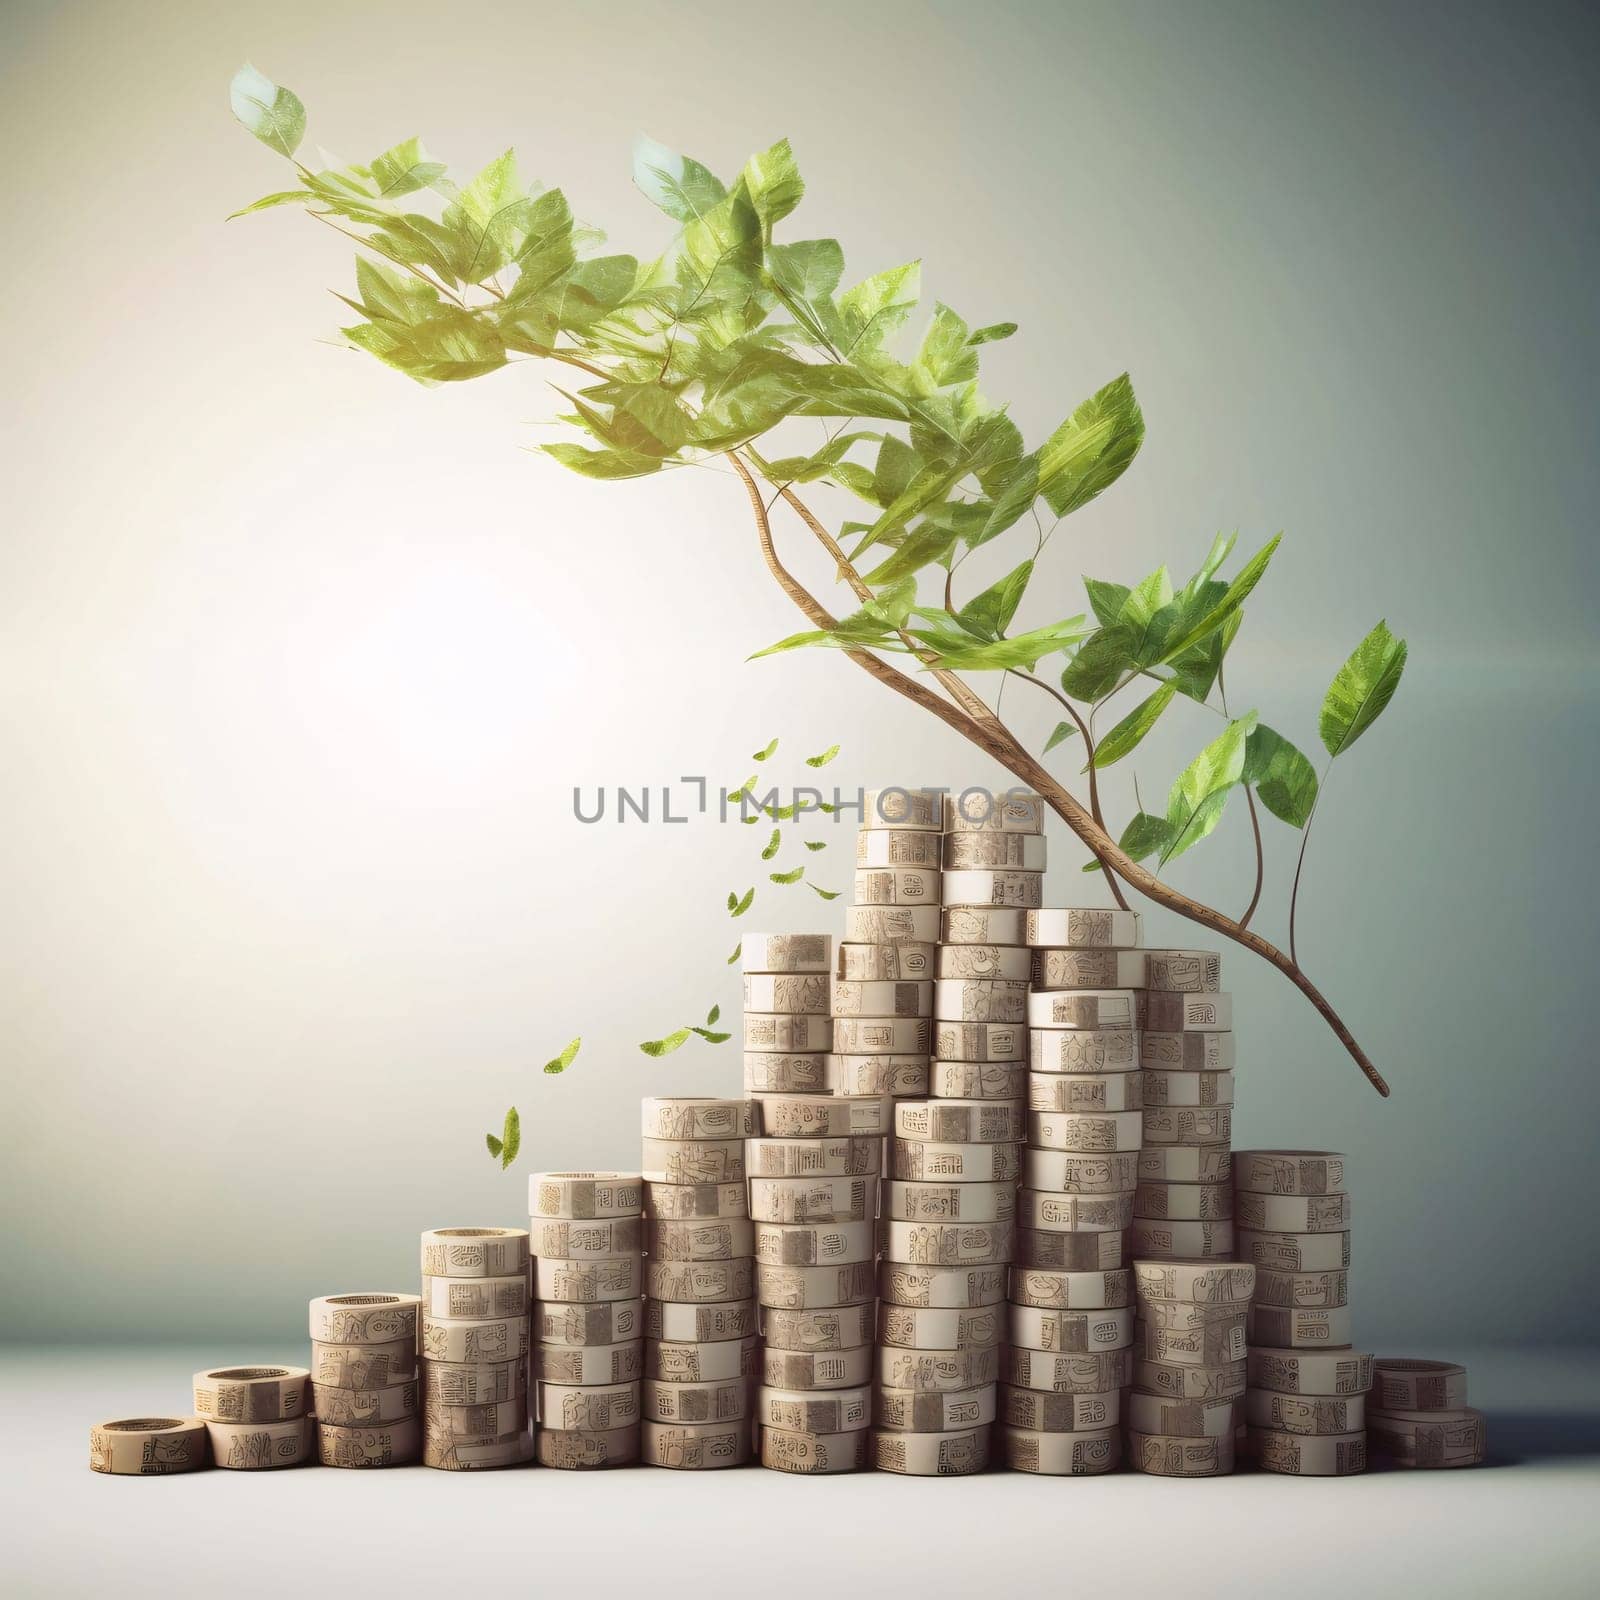 Stock Market: Investment concept, Coins stack with green tree growing on top.